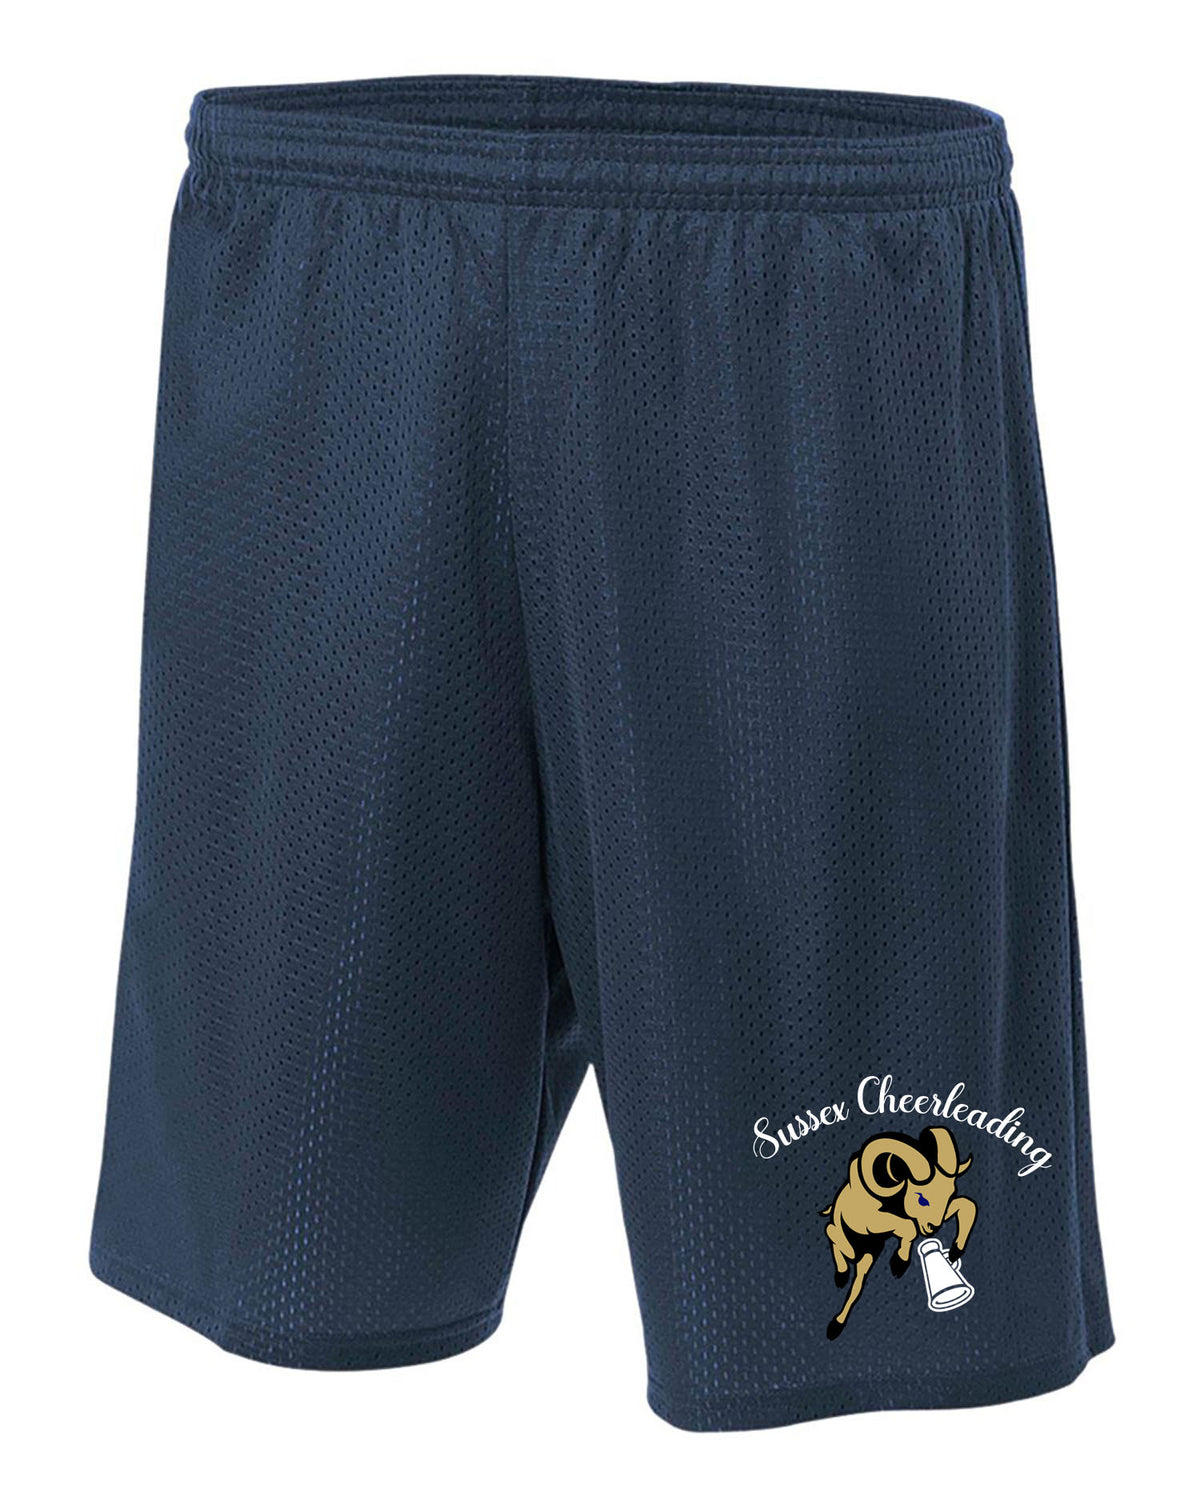 Sussex Middle Cheer Design 3 Mesh Shorts